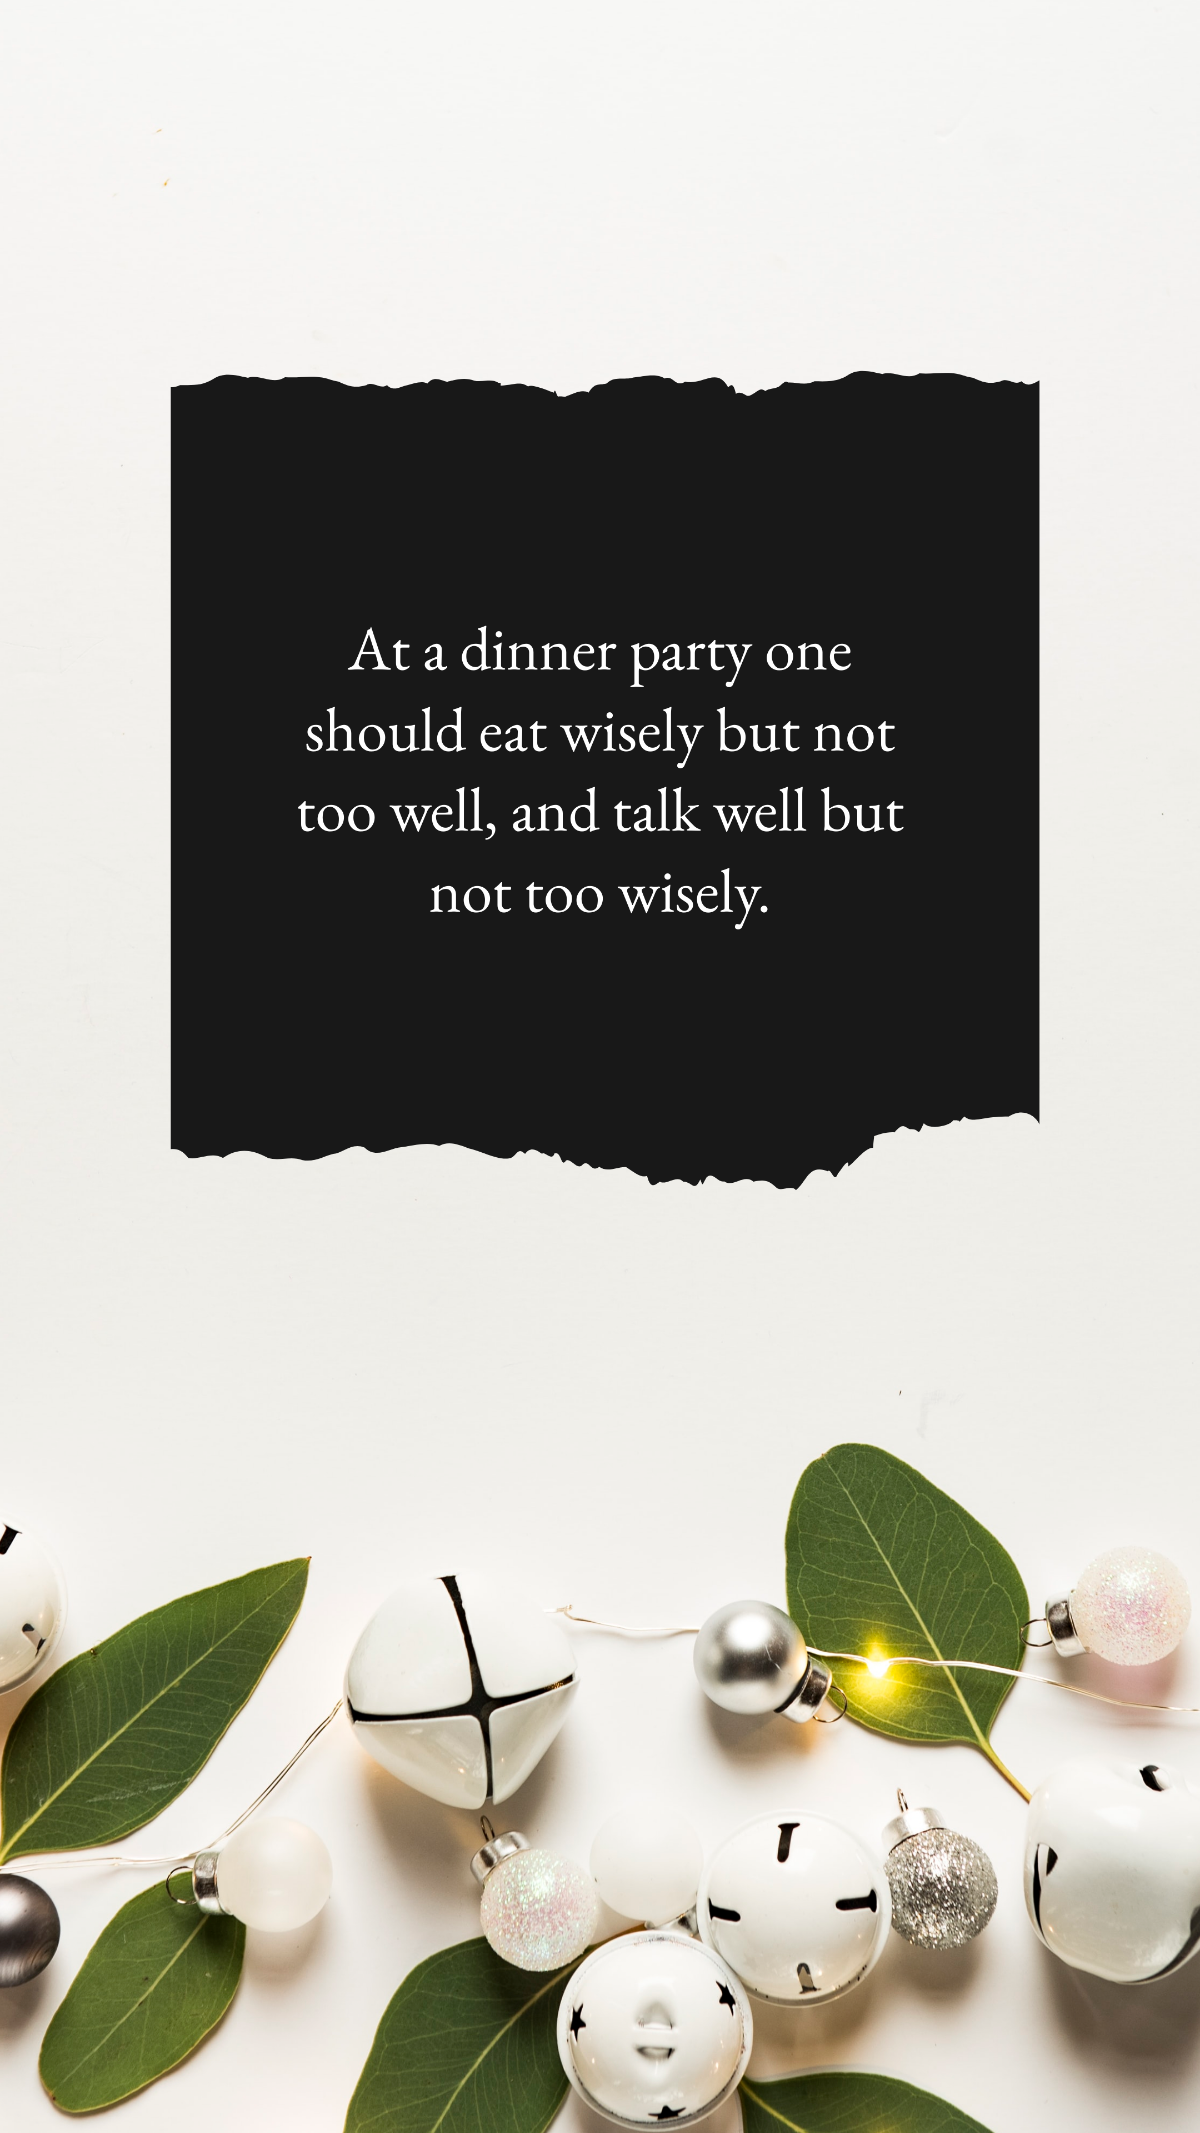 At a dinner party one should eat wisely but not too well, and talk well but not too wisely. Template